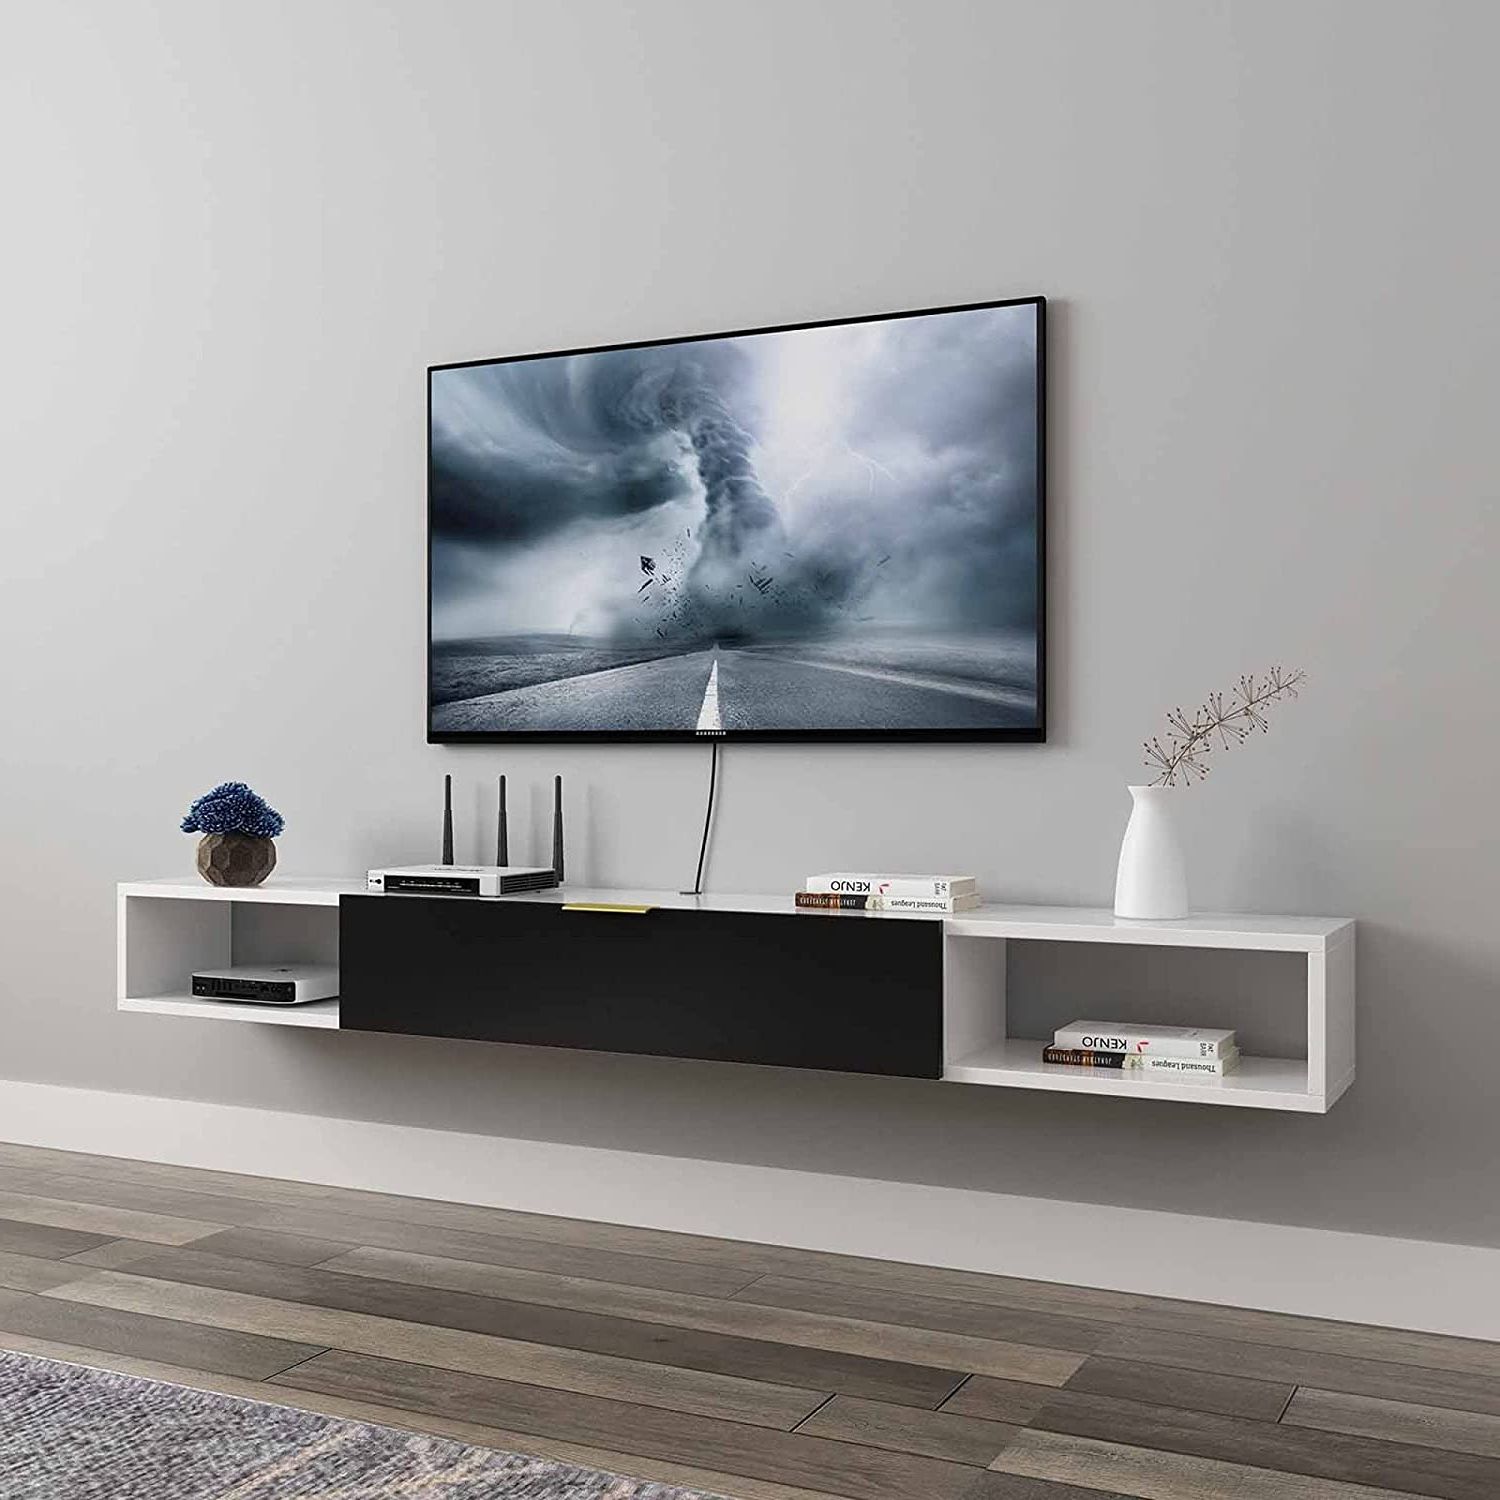 Matte Tv Stands Intended For Well Known Wall Mounted Tv Storage Unit, Matte Floating Tv Stand Cabinet, Media  Entertainment Center Home Furniture For Living Room Bedroom/e / 120cm :  Amazon.co (View 10 of 10)